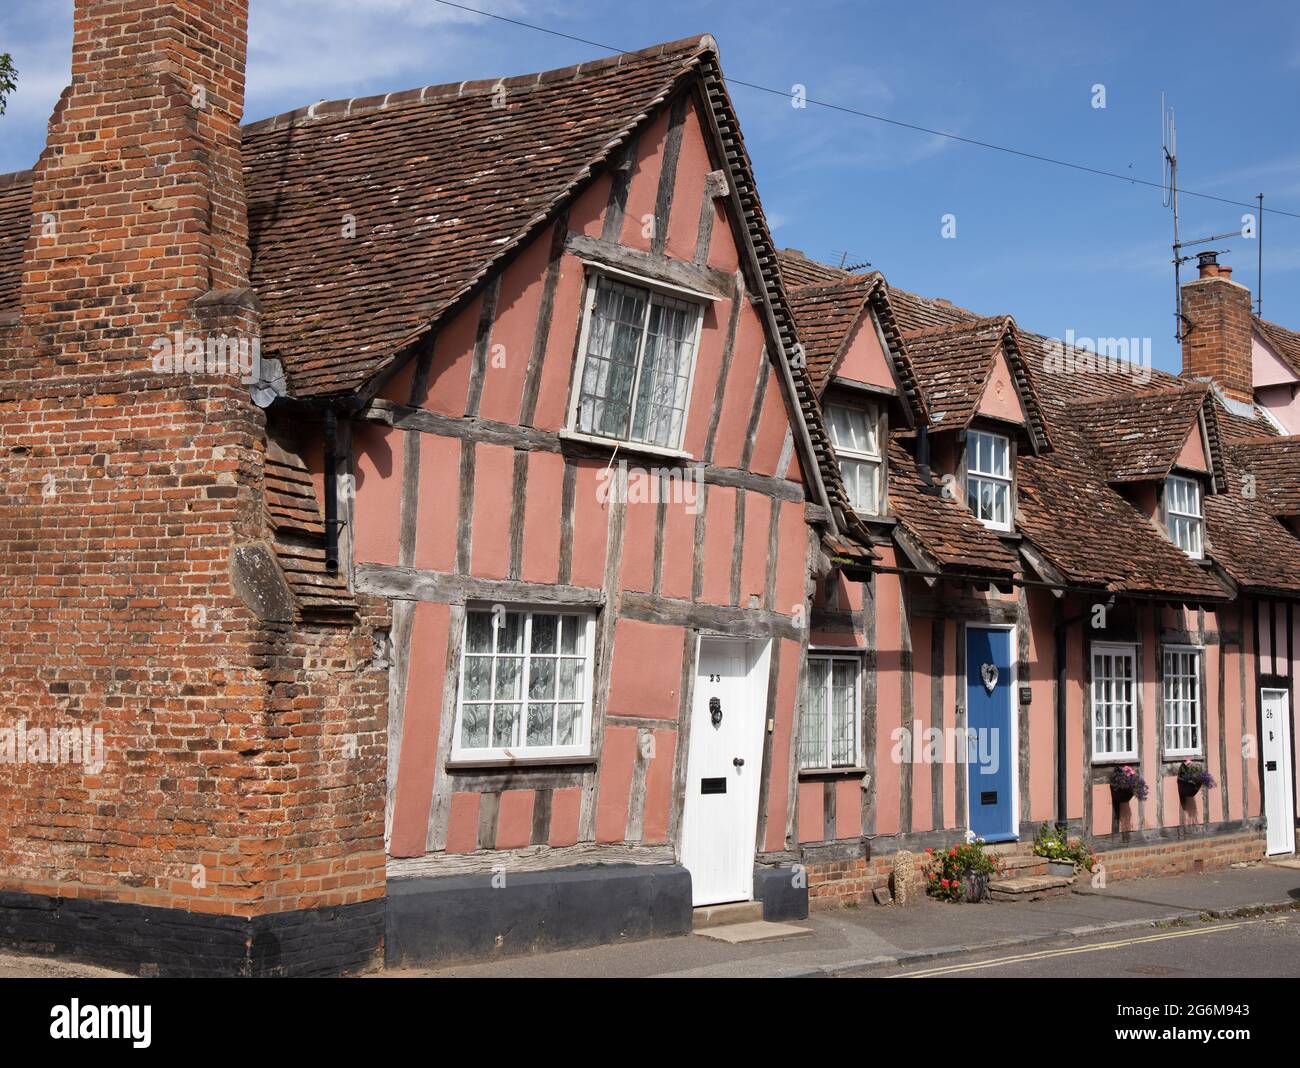 Grand timber framed house on Water Street at Lavenham Suffolk England Stock Photo